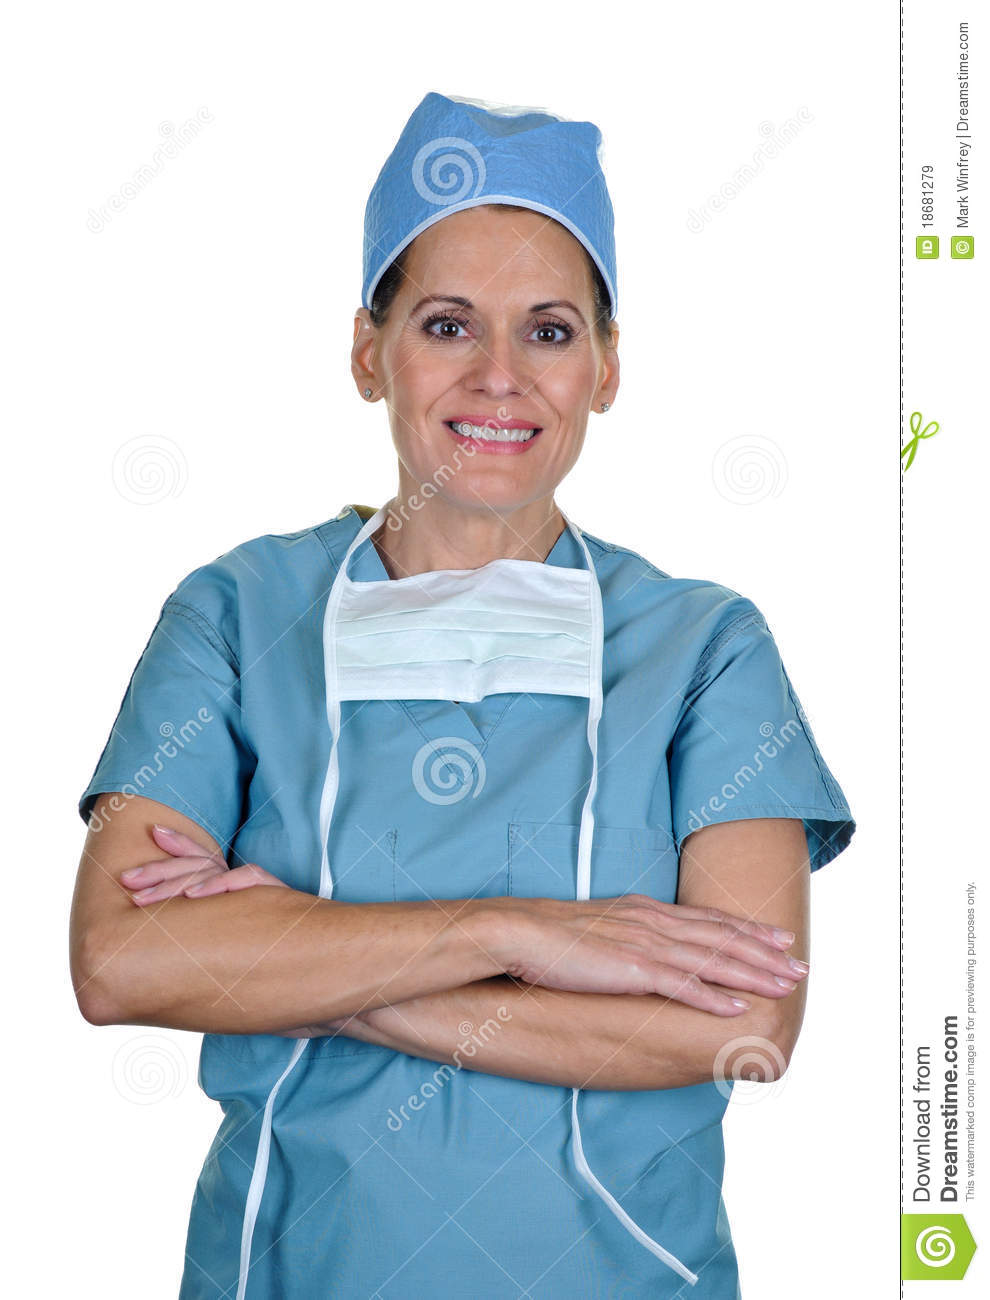 Attractive Female Surgeon Royalty Free Stock Images   Image  18681279